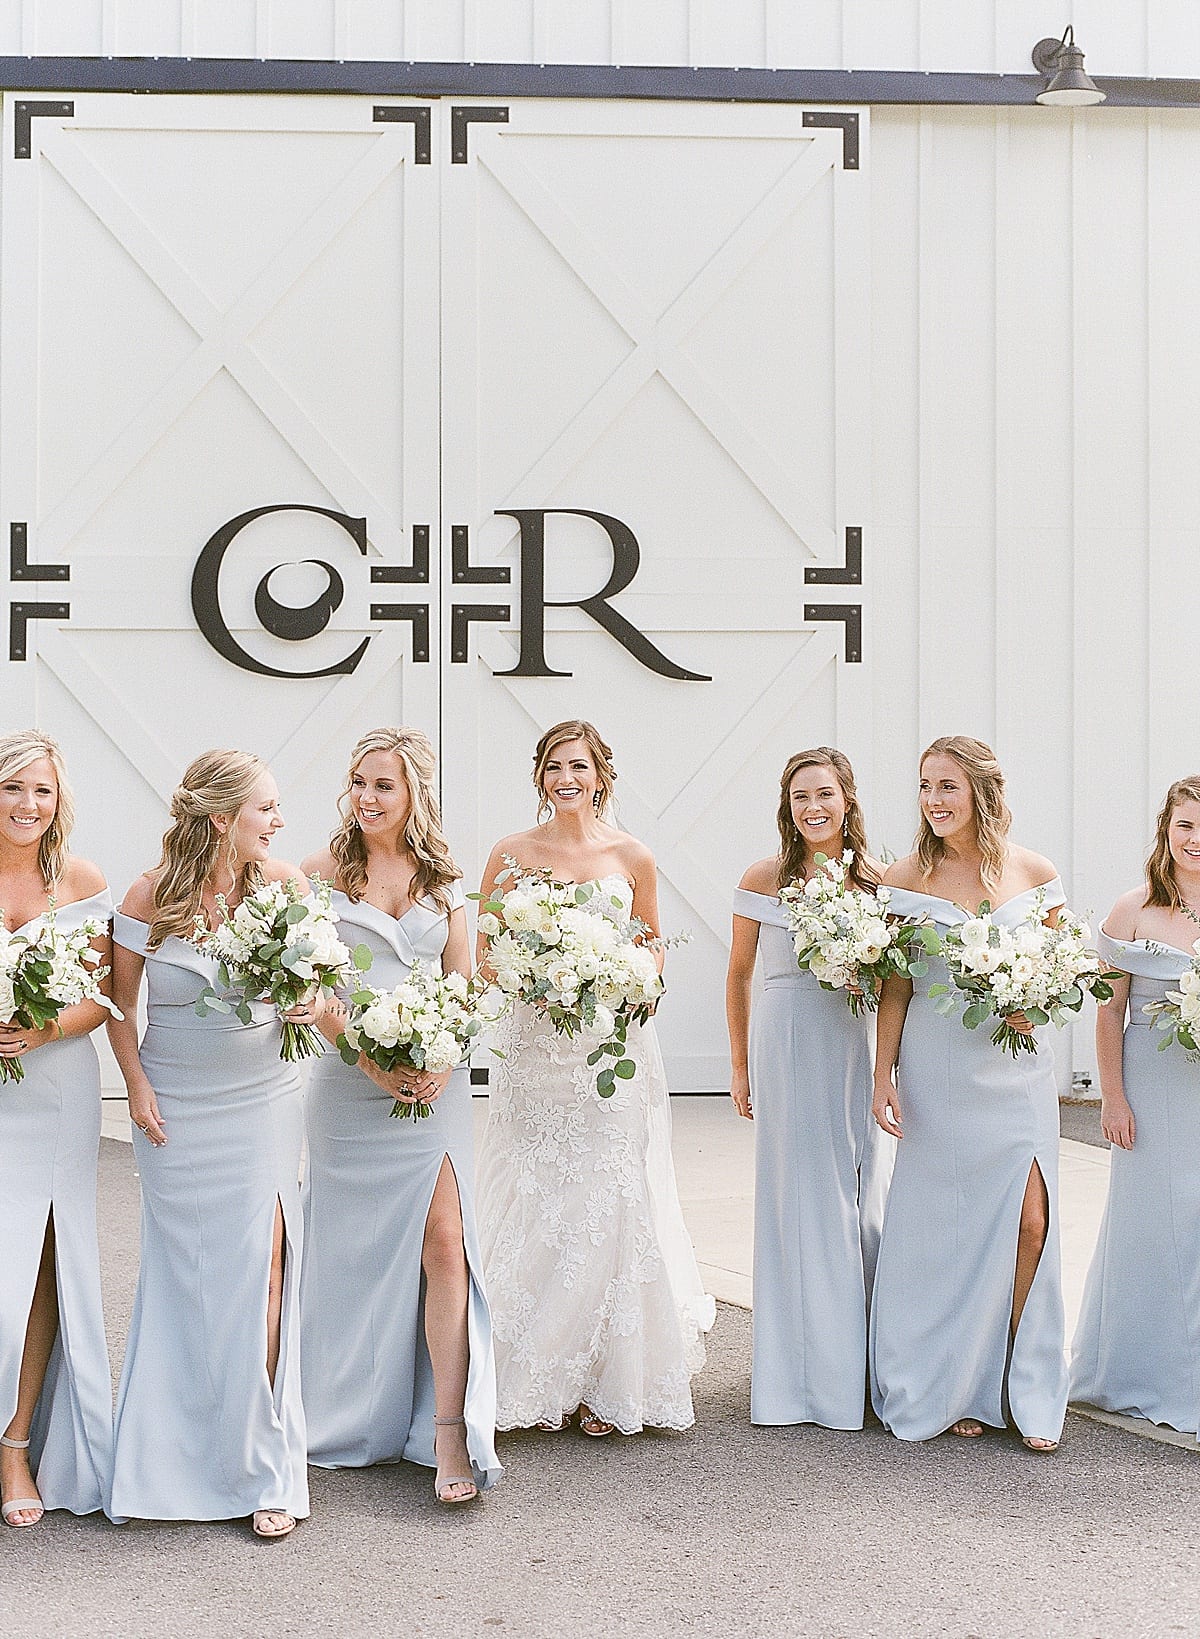 Bride Walking With Bridesmaids in Blue Dresses Photo